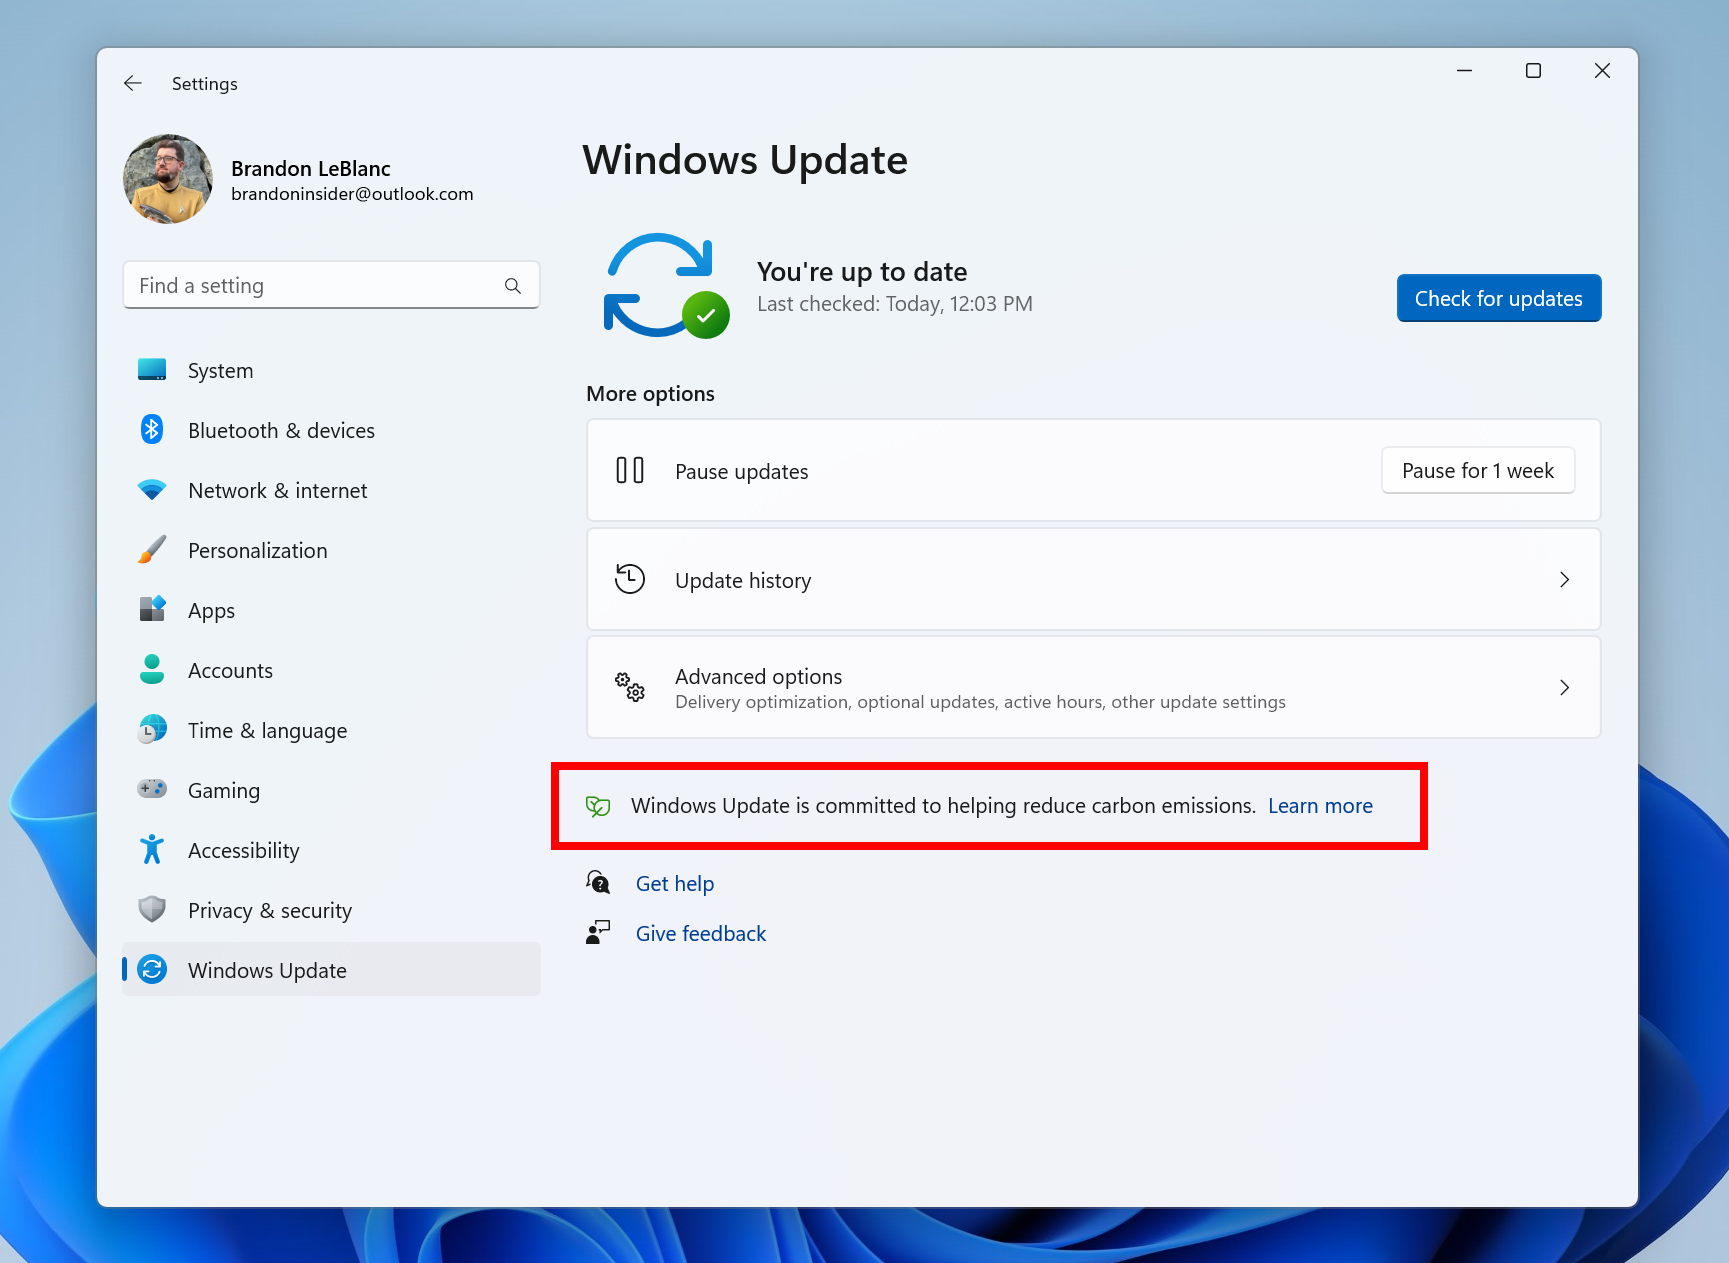 Update Windows: Check for and install any available Windows updates that may include Bluetooth fixes.
Reset Bluetooth settings: Reset the Bluetooth settings to their default values.